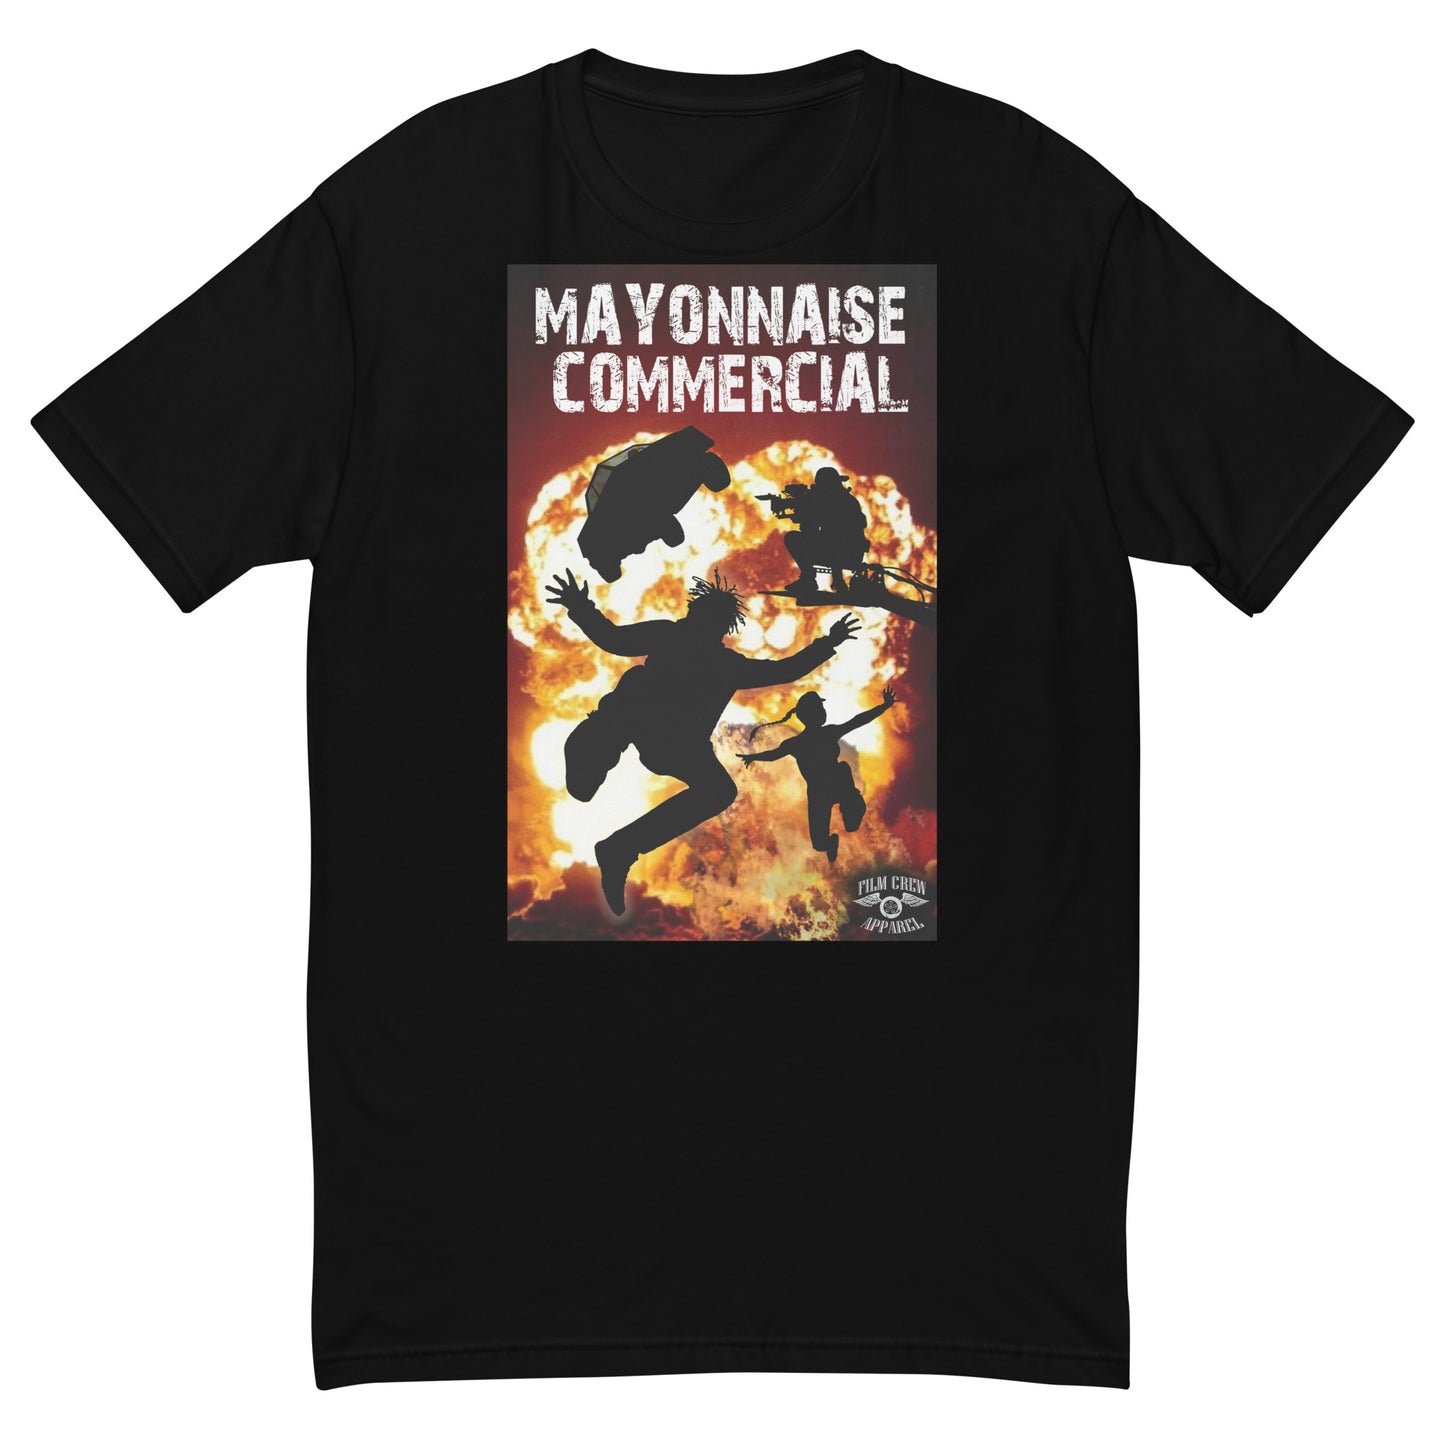 Mayonnaise Commercial T-shirt